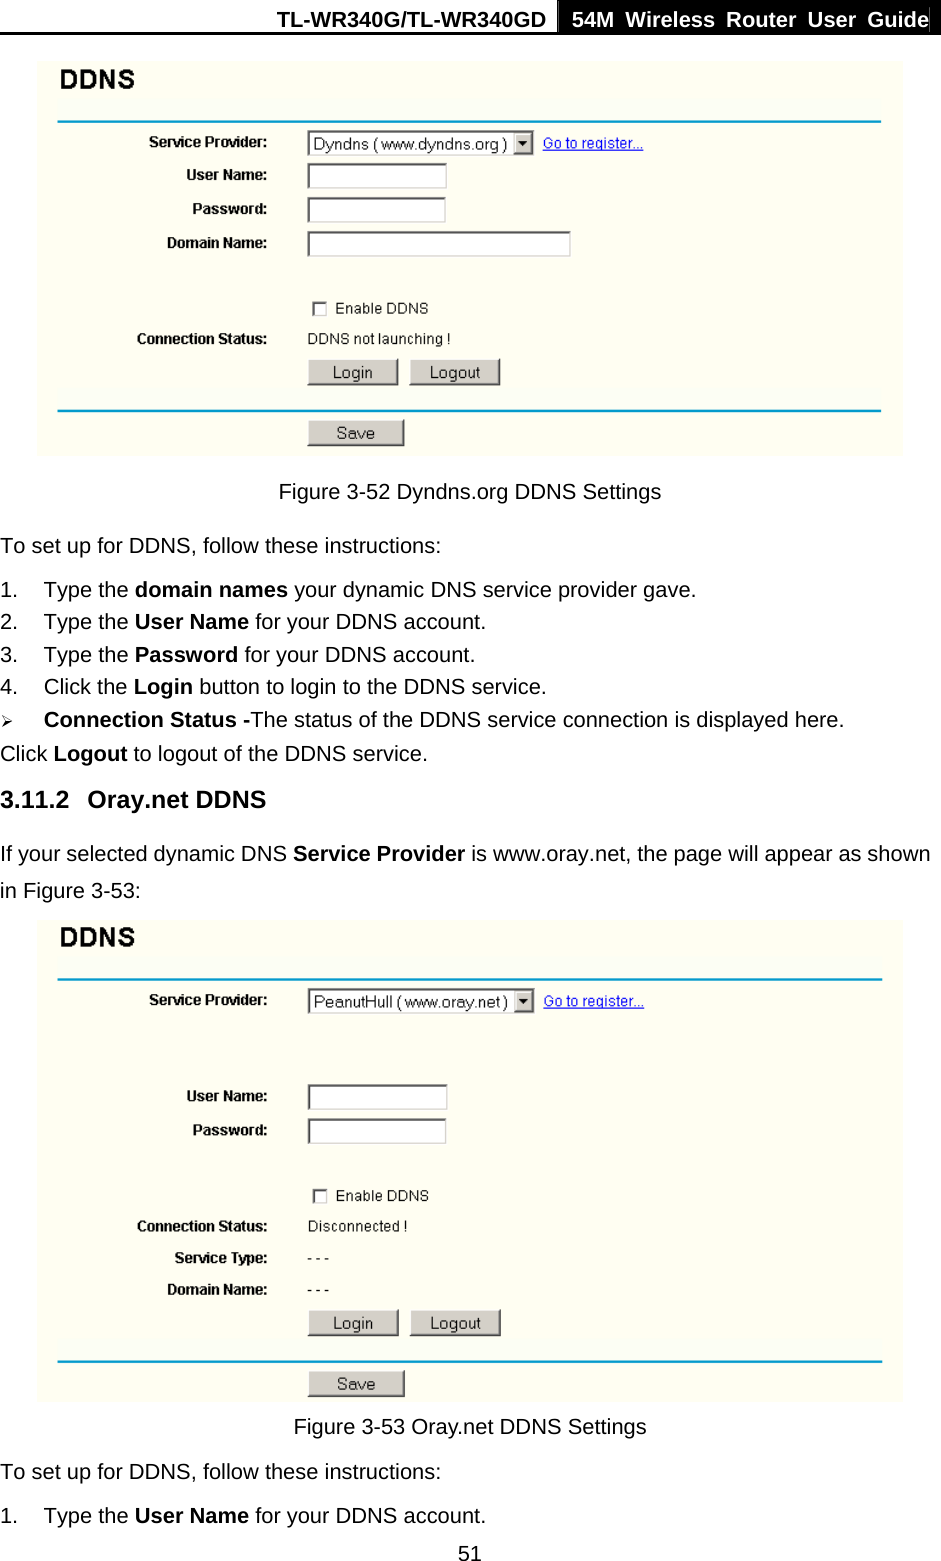 TL-WR340G/TL-WR340GD 54M Wireless Router User Guide  51 Figure 3-52 Dyndns.org DDNS Settings To set up for DDNS, follow these instructions: 1. Type the domain names your dynamic DNS service provider gave.   2. Type the User Name for your DDNS account.   3. Type the Password for your DDNS account.   4. Click the Login button to login to the DDNS service. ¾ Connection Status -The status of the DDNS service connection is displayed here. Click Logout to logout of the DDNS service. 3.11.2 Oray.net DDNS If your selected dynamic DNS Service Provider is www.oray.net, the page will appear as shown in Figure 3-53:  Figure 3-53 Oray.net DDNS Settings To set up for DDNS, follow these instructions: 1. Type the User Name for your DDNS account.   